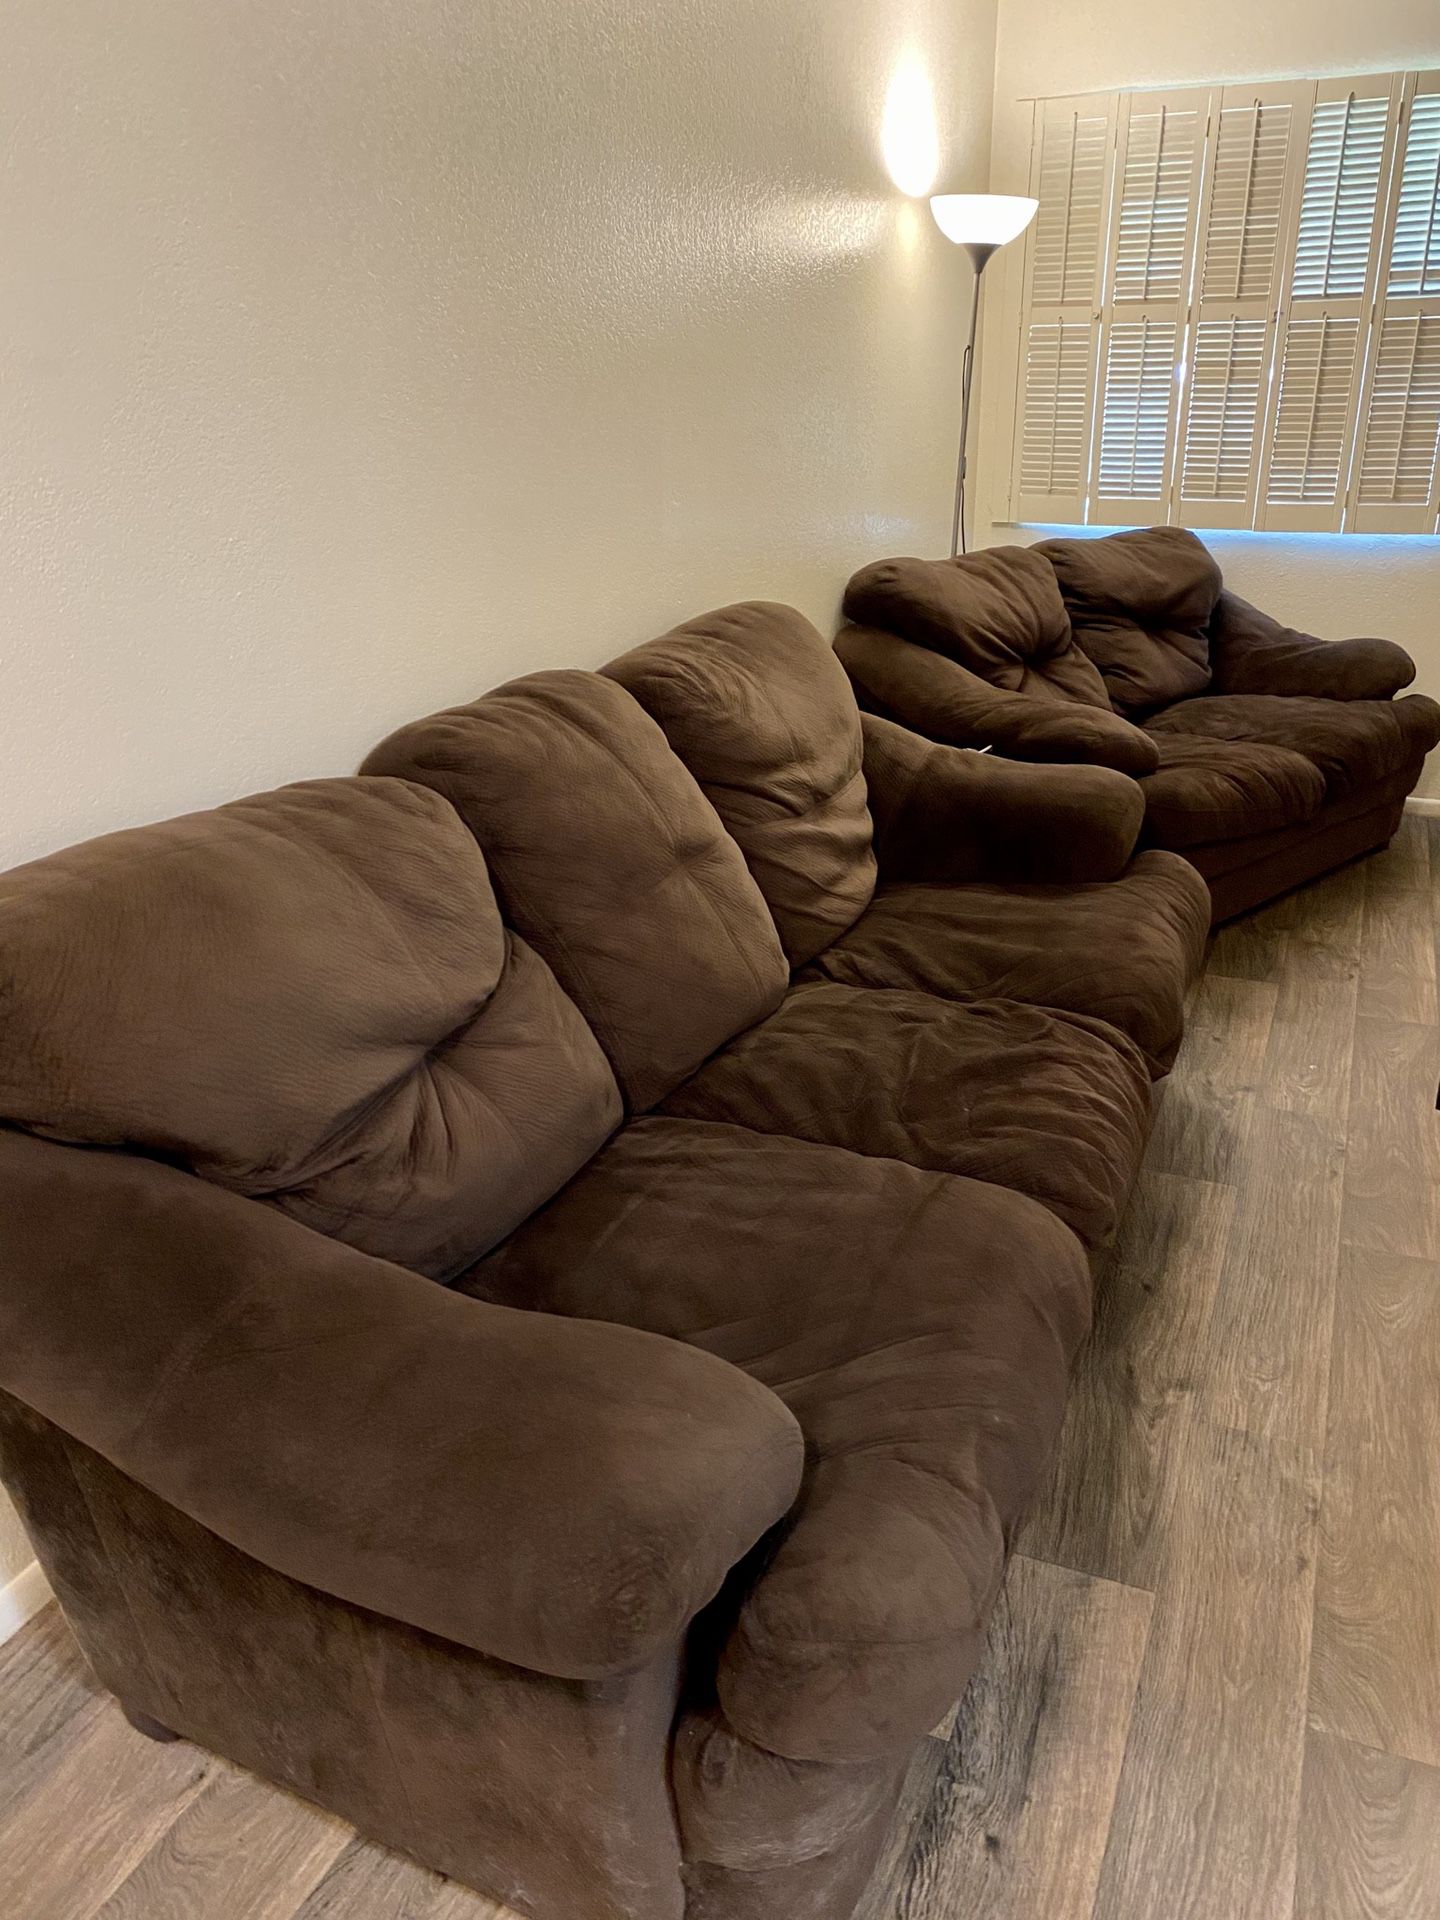 Mocha Brown Couches